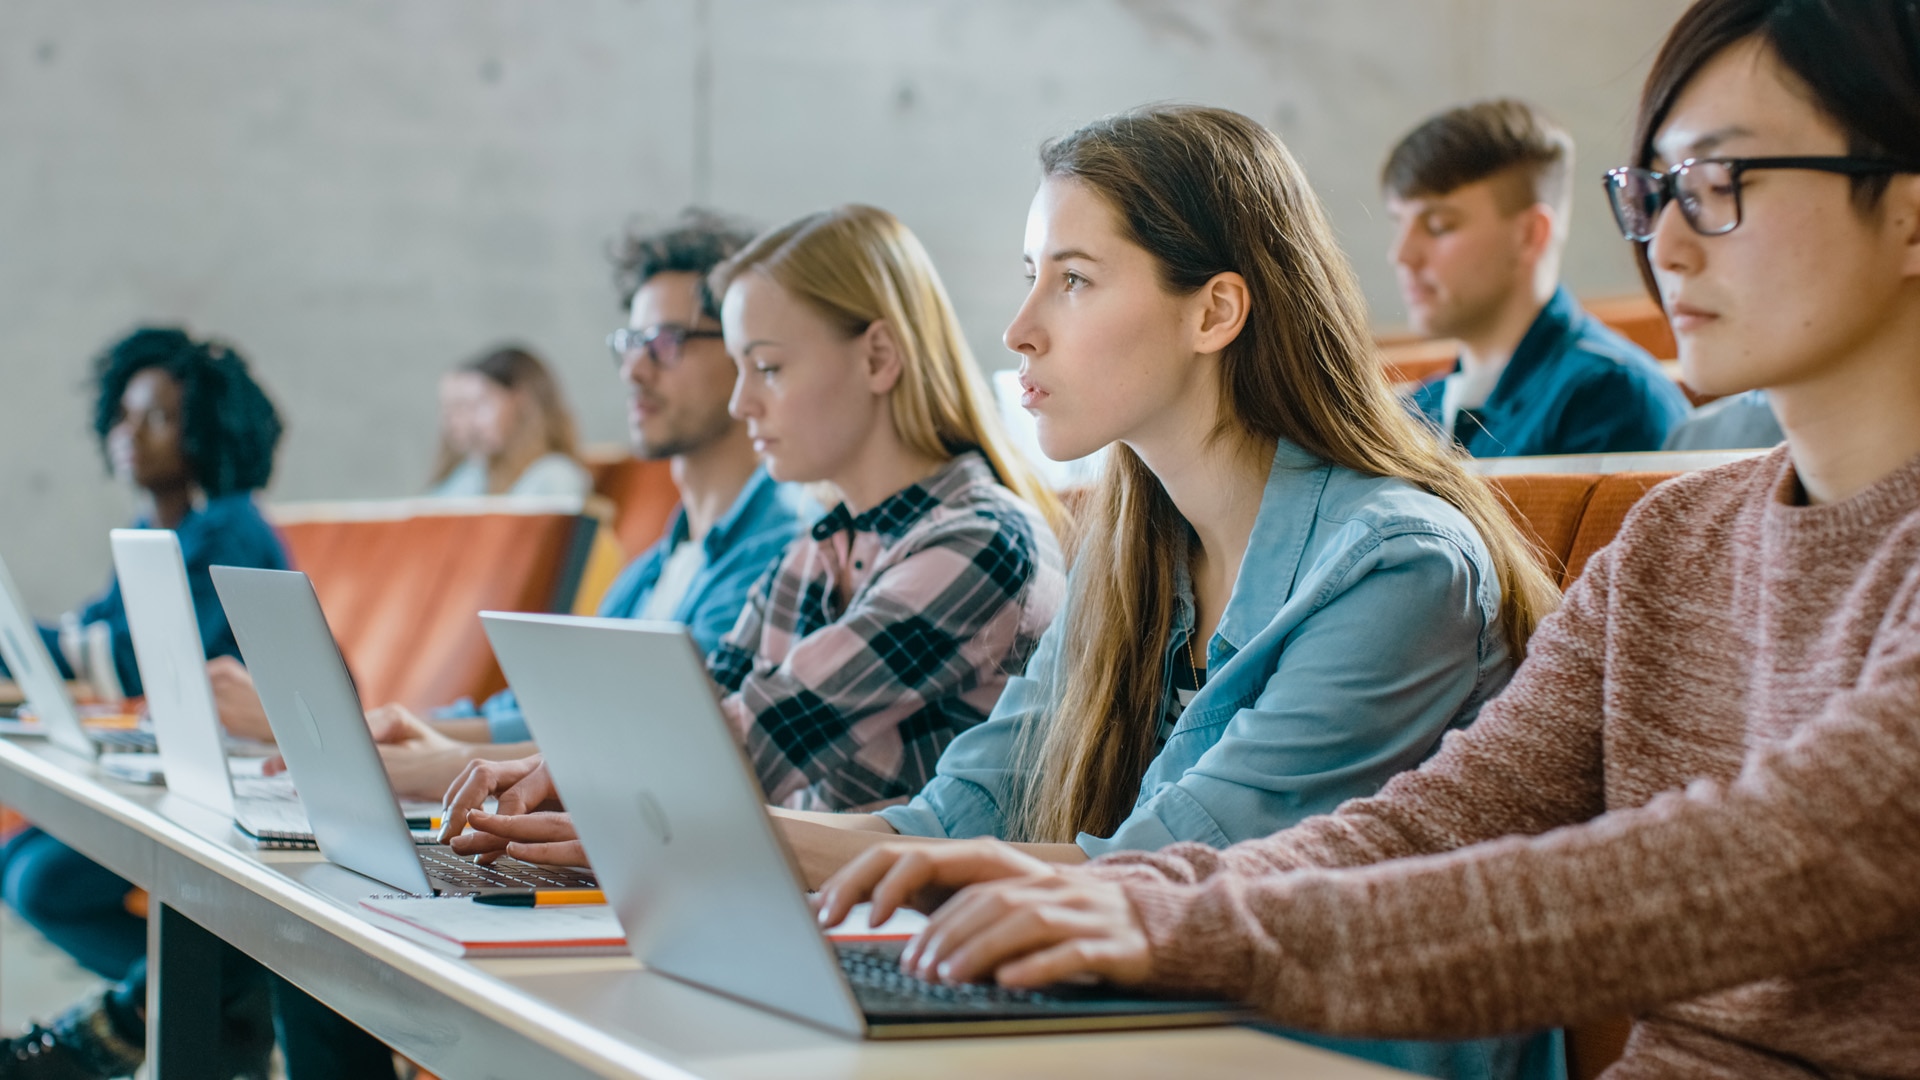 Large Group of Multi Ethnic Students Working on the Laptops while Listening to a Lecture in the Modern Classroom. Bright Young People Study at University.; Shutterstock ID 1077839363; purchase_order: -; job: -; client: -; other: -